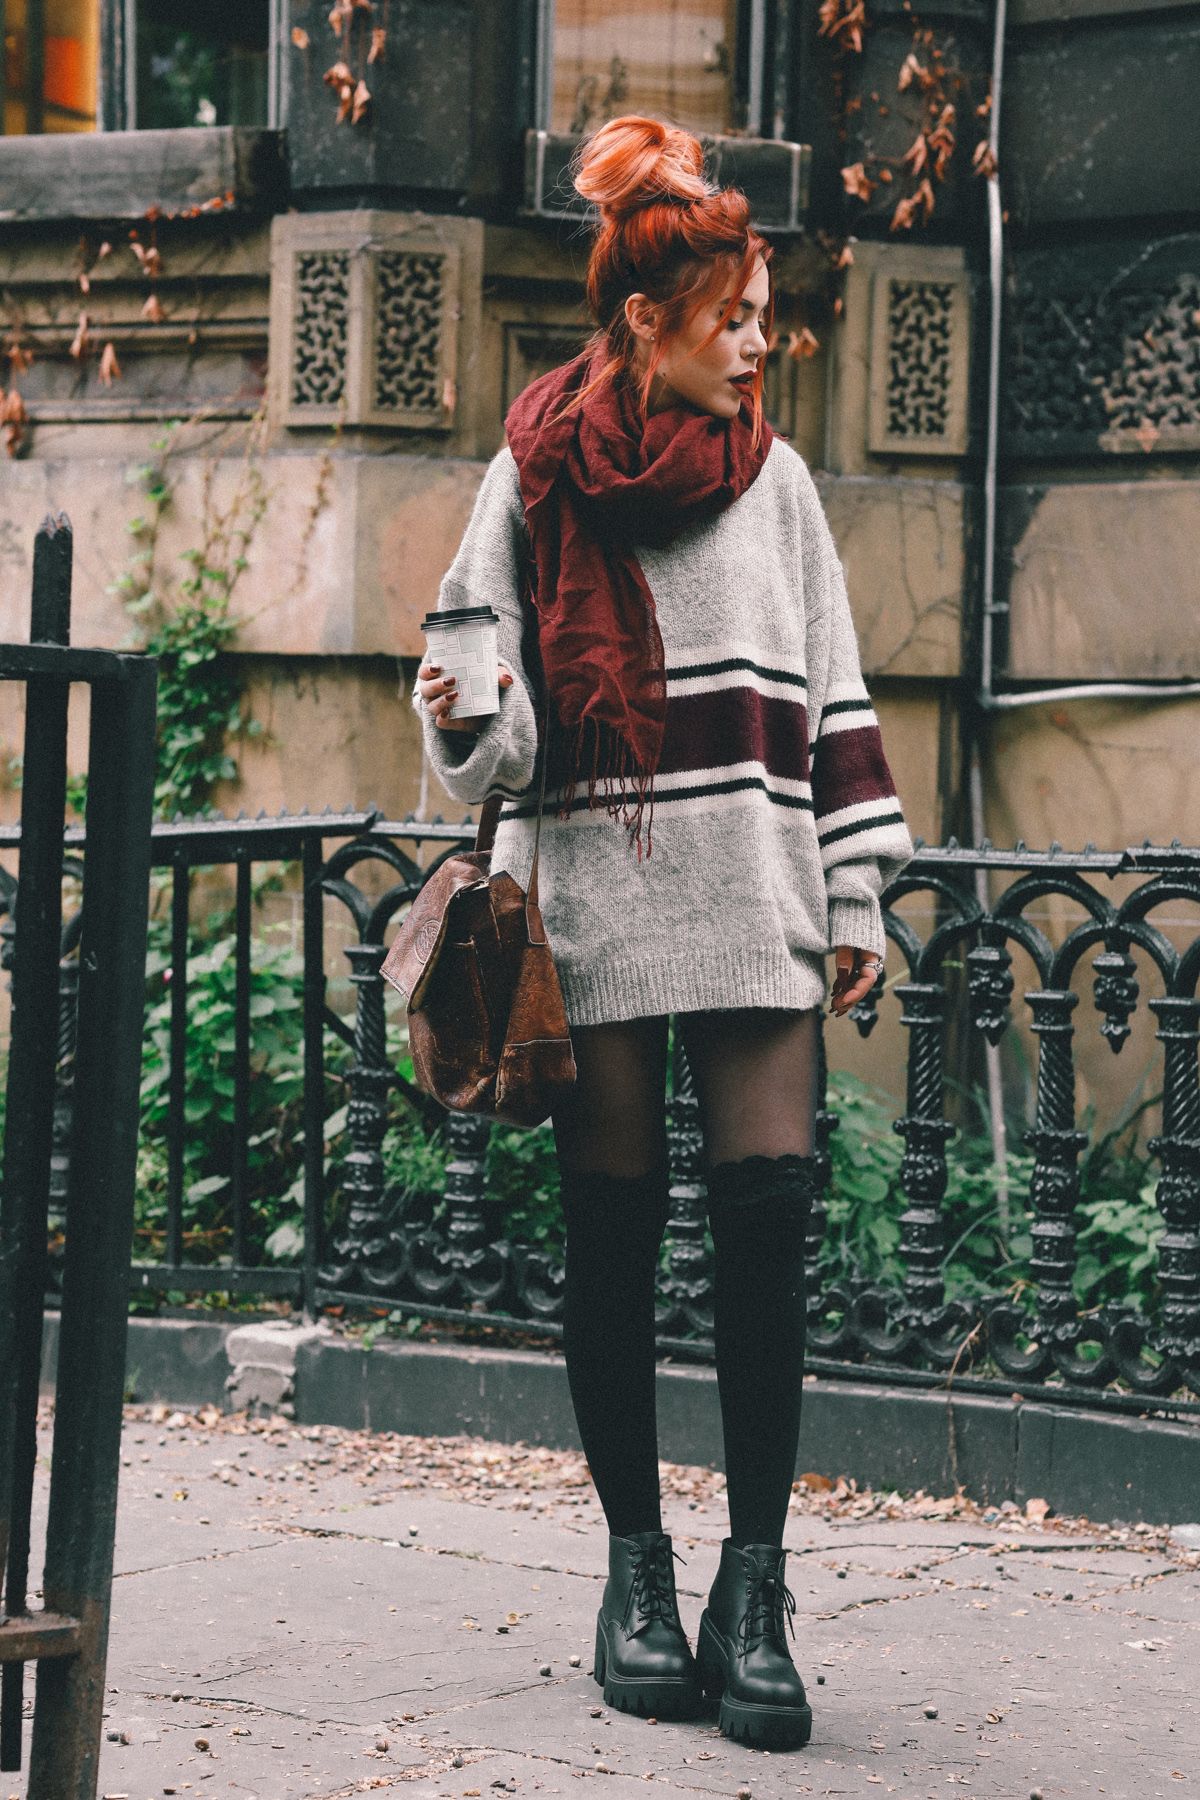 15 Relaxed Looking Oversized Sweater Outfit Ideas for Women